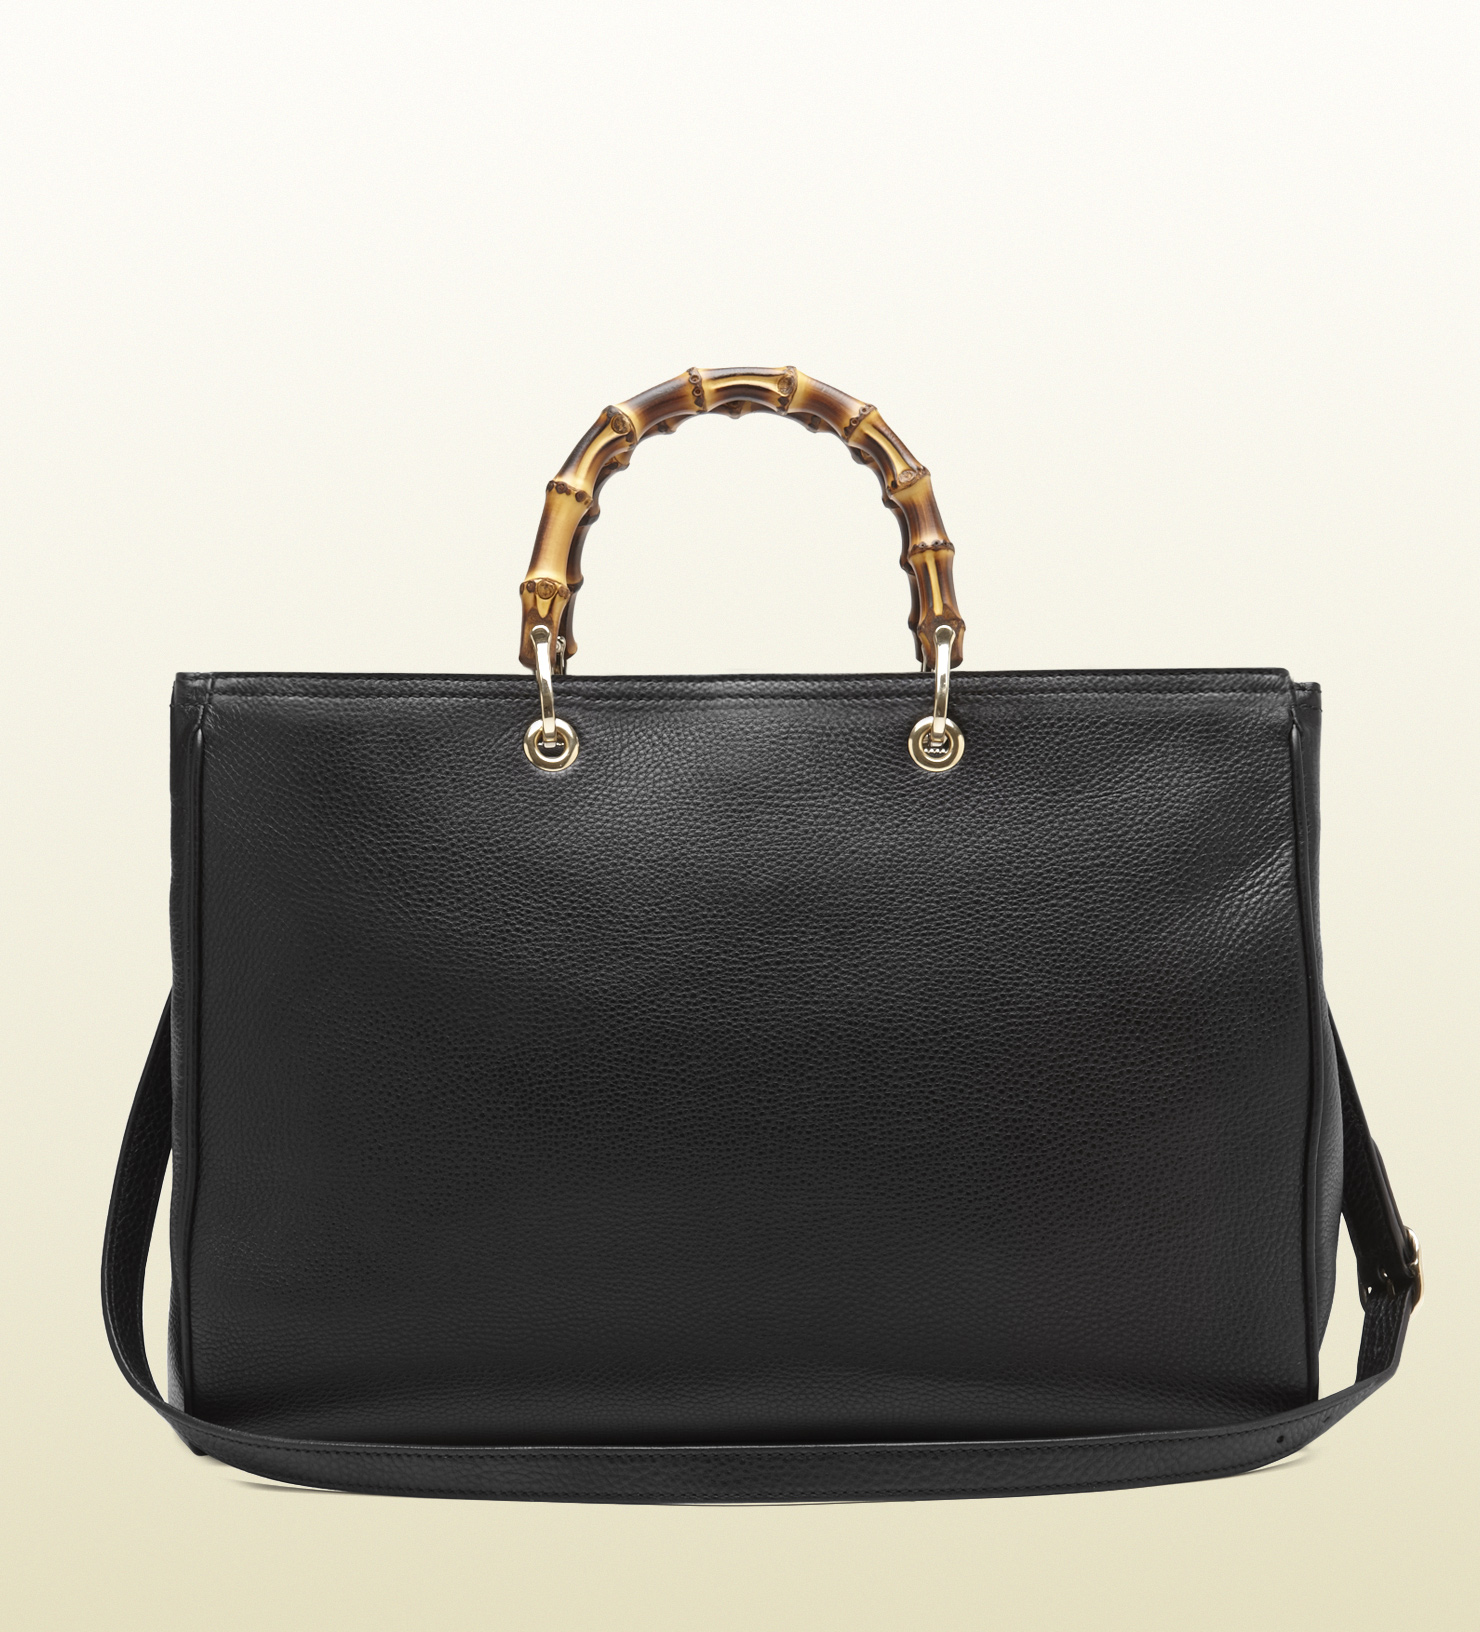 Gucci Bamboo Leather Tote in Black (bamboo) | Lyst